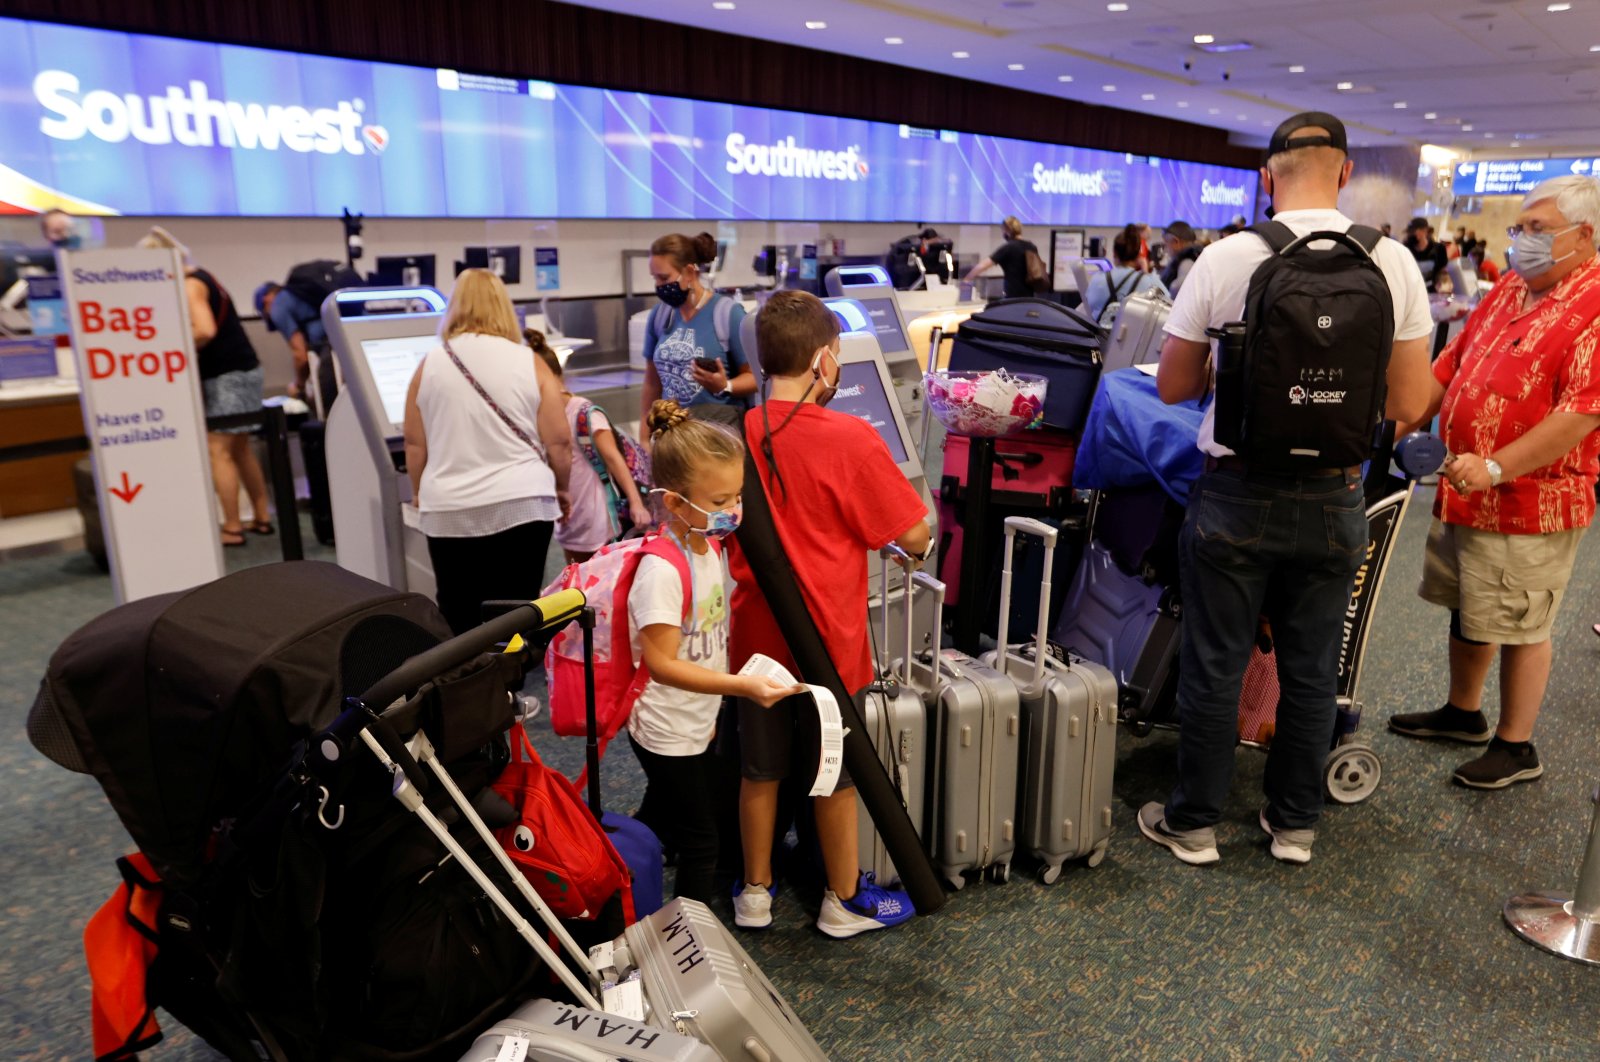 Passengers check in for a Southwest Airlines flight at Orlando International Airport in Orlando, Florida, U.S., Oct. 11, 2021. (Reuters Photo)